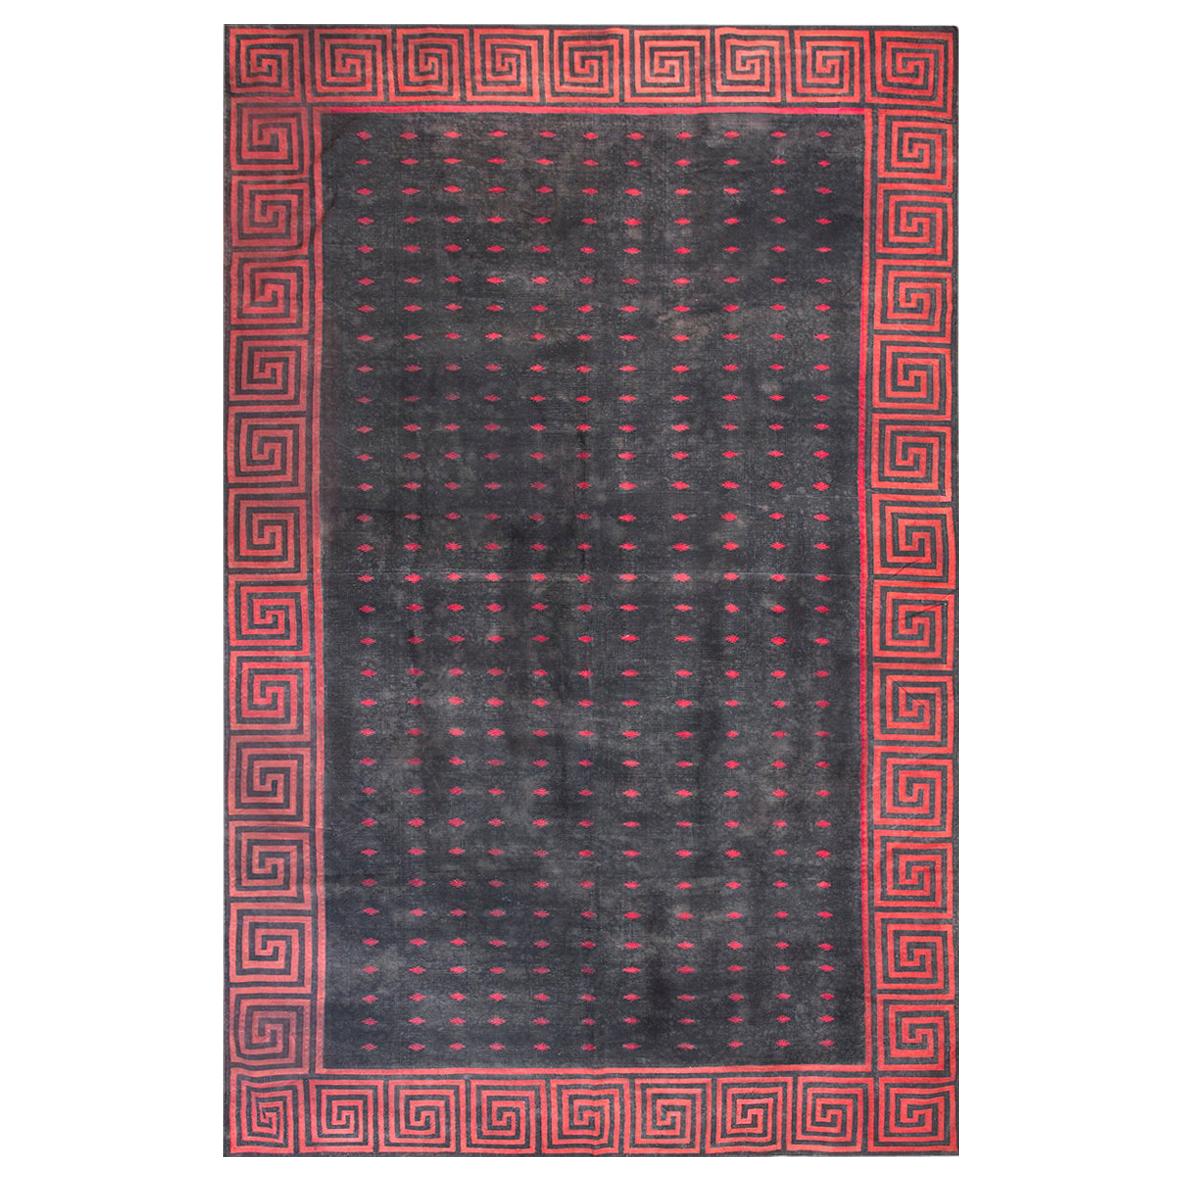 Early 20th Century Indian Cotton Dhurrie Carpet ( 8'3" X 12'9" - 252 X 388 )